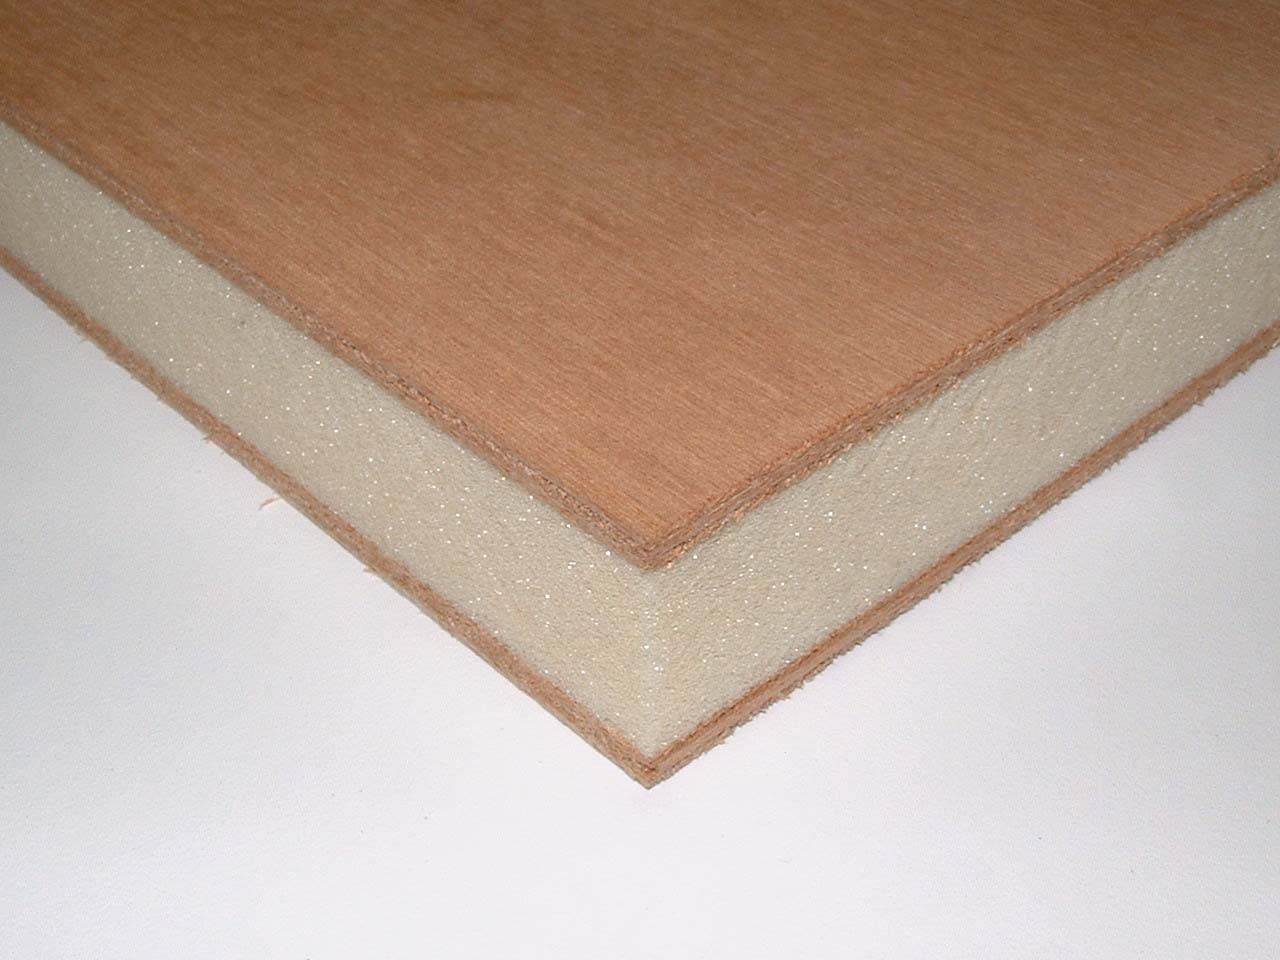 We use marine grade plywood (Okoume) covered with epoxy and then a 